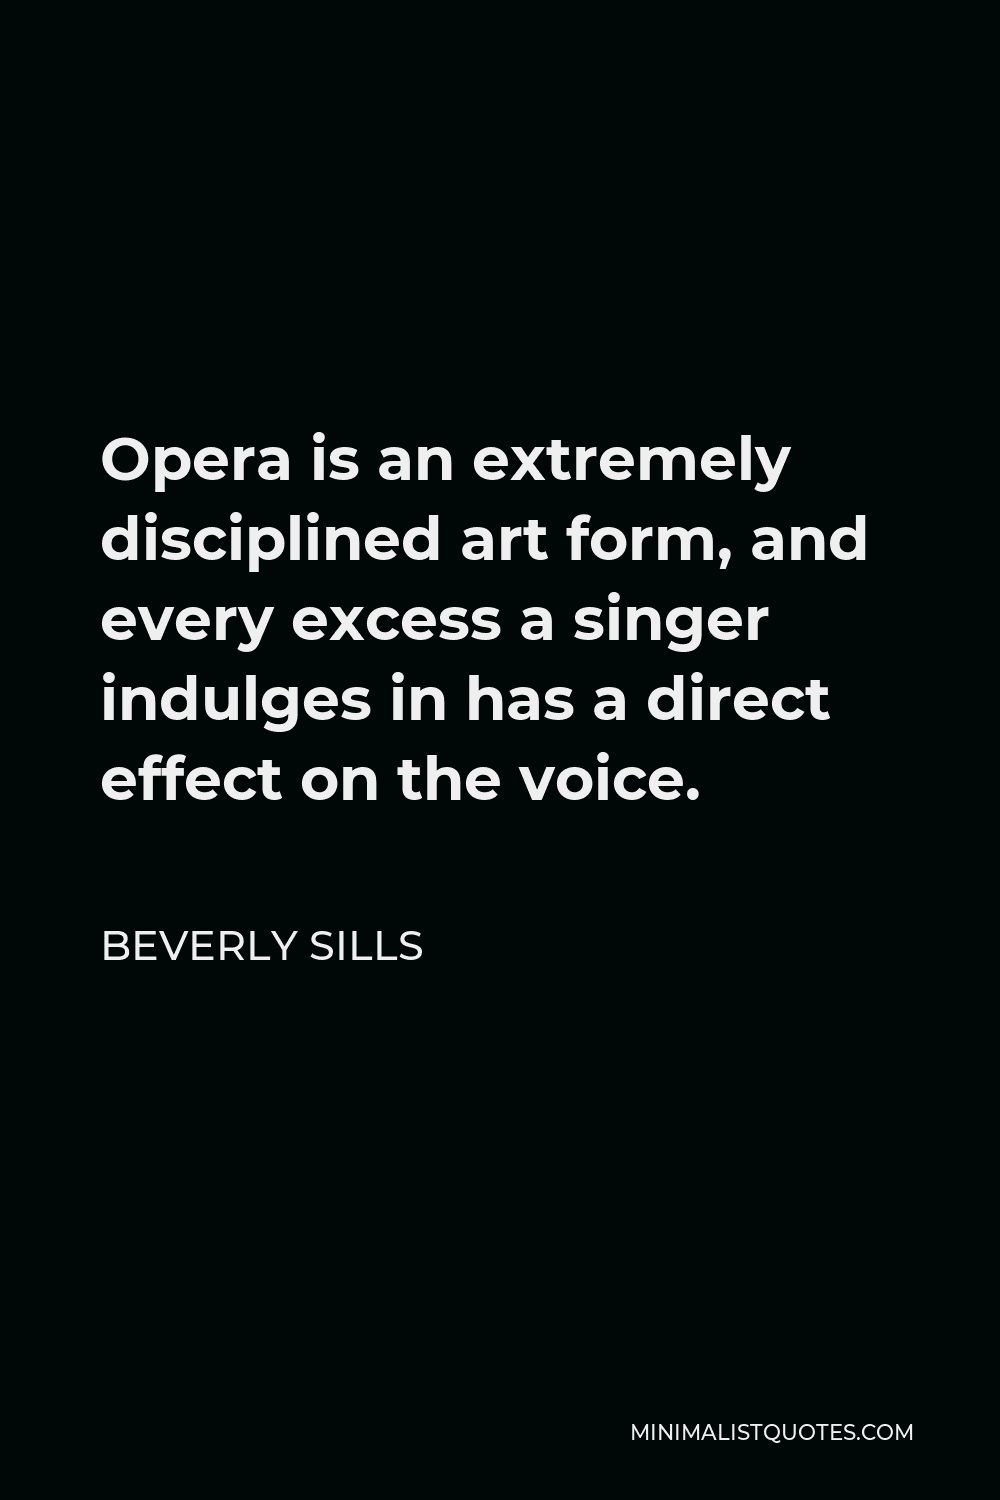 Beverly Sills Quote - Opera is an extremely disciplined art form, and every excess a singer indulges in has a direct effect on the voice.